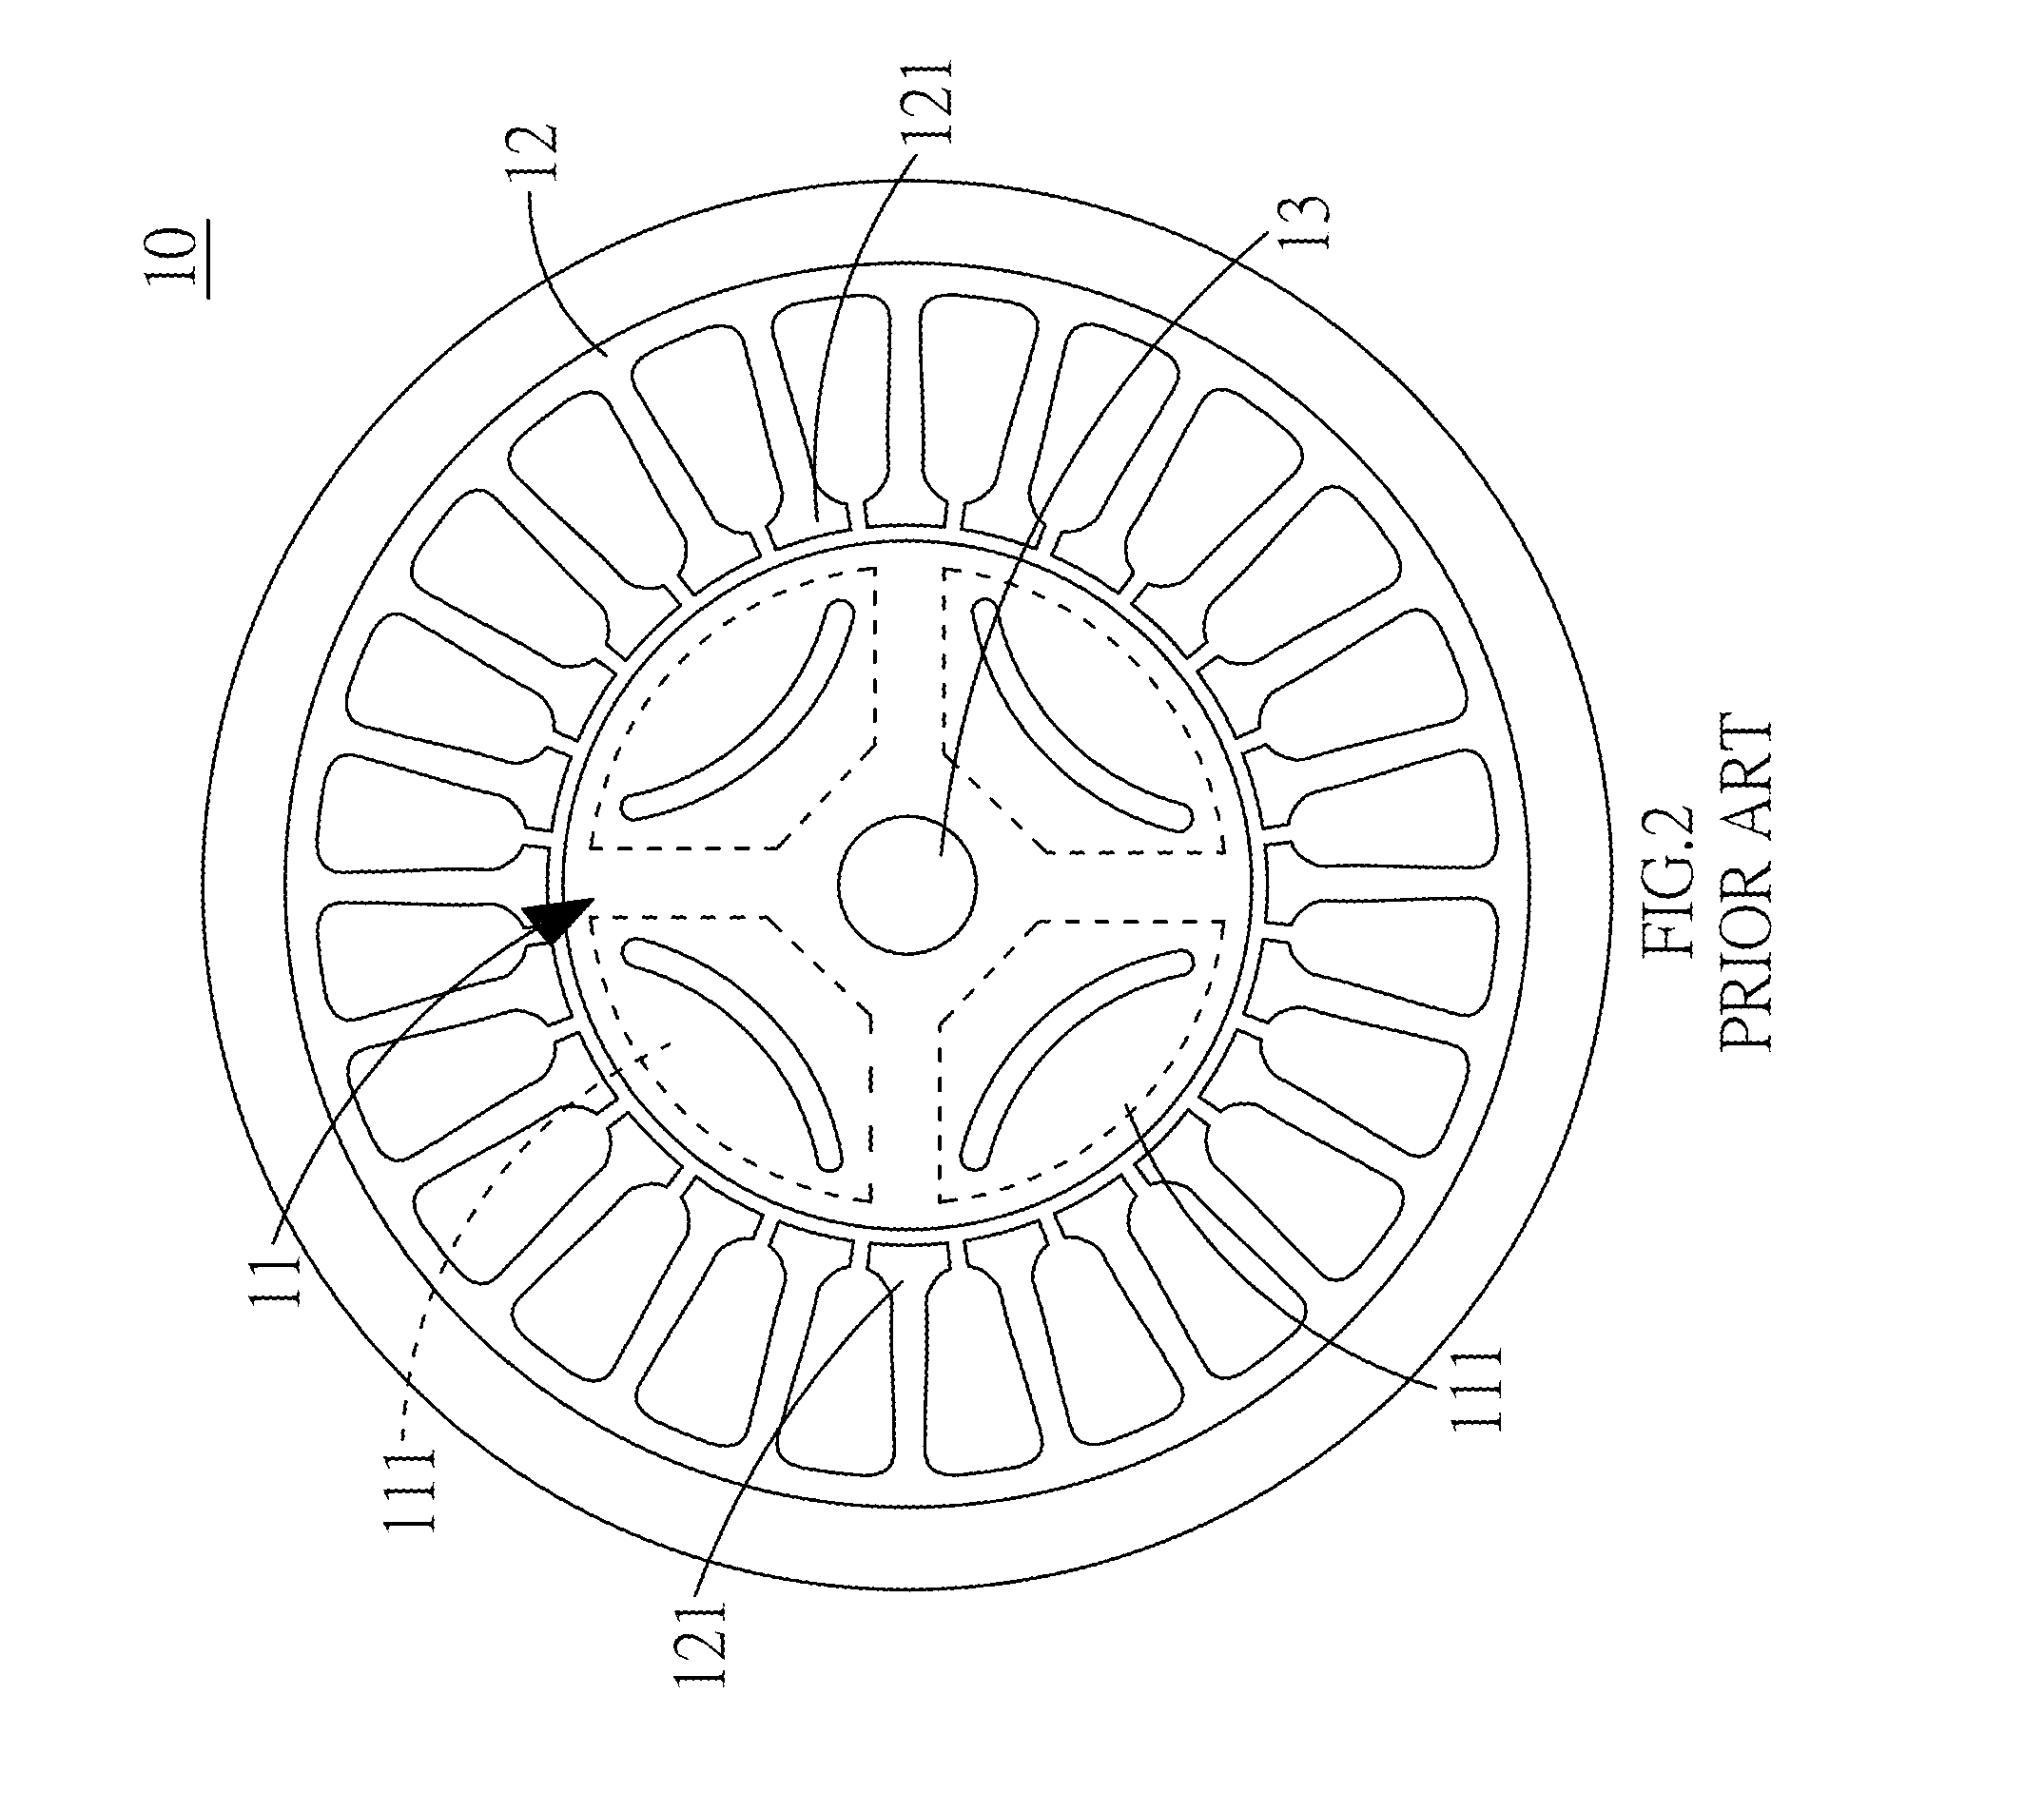 Motor having more magnets on effective area of the rotor thereof